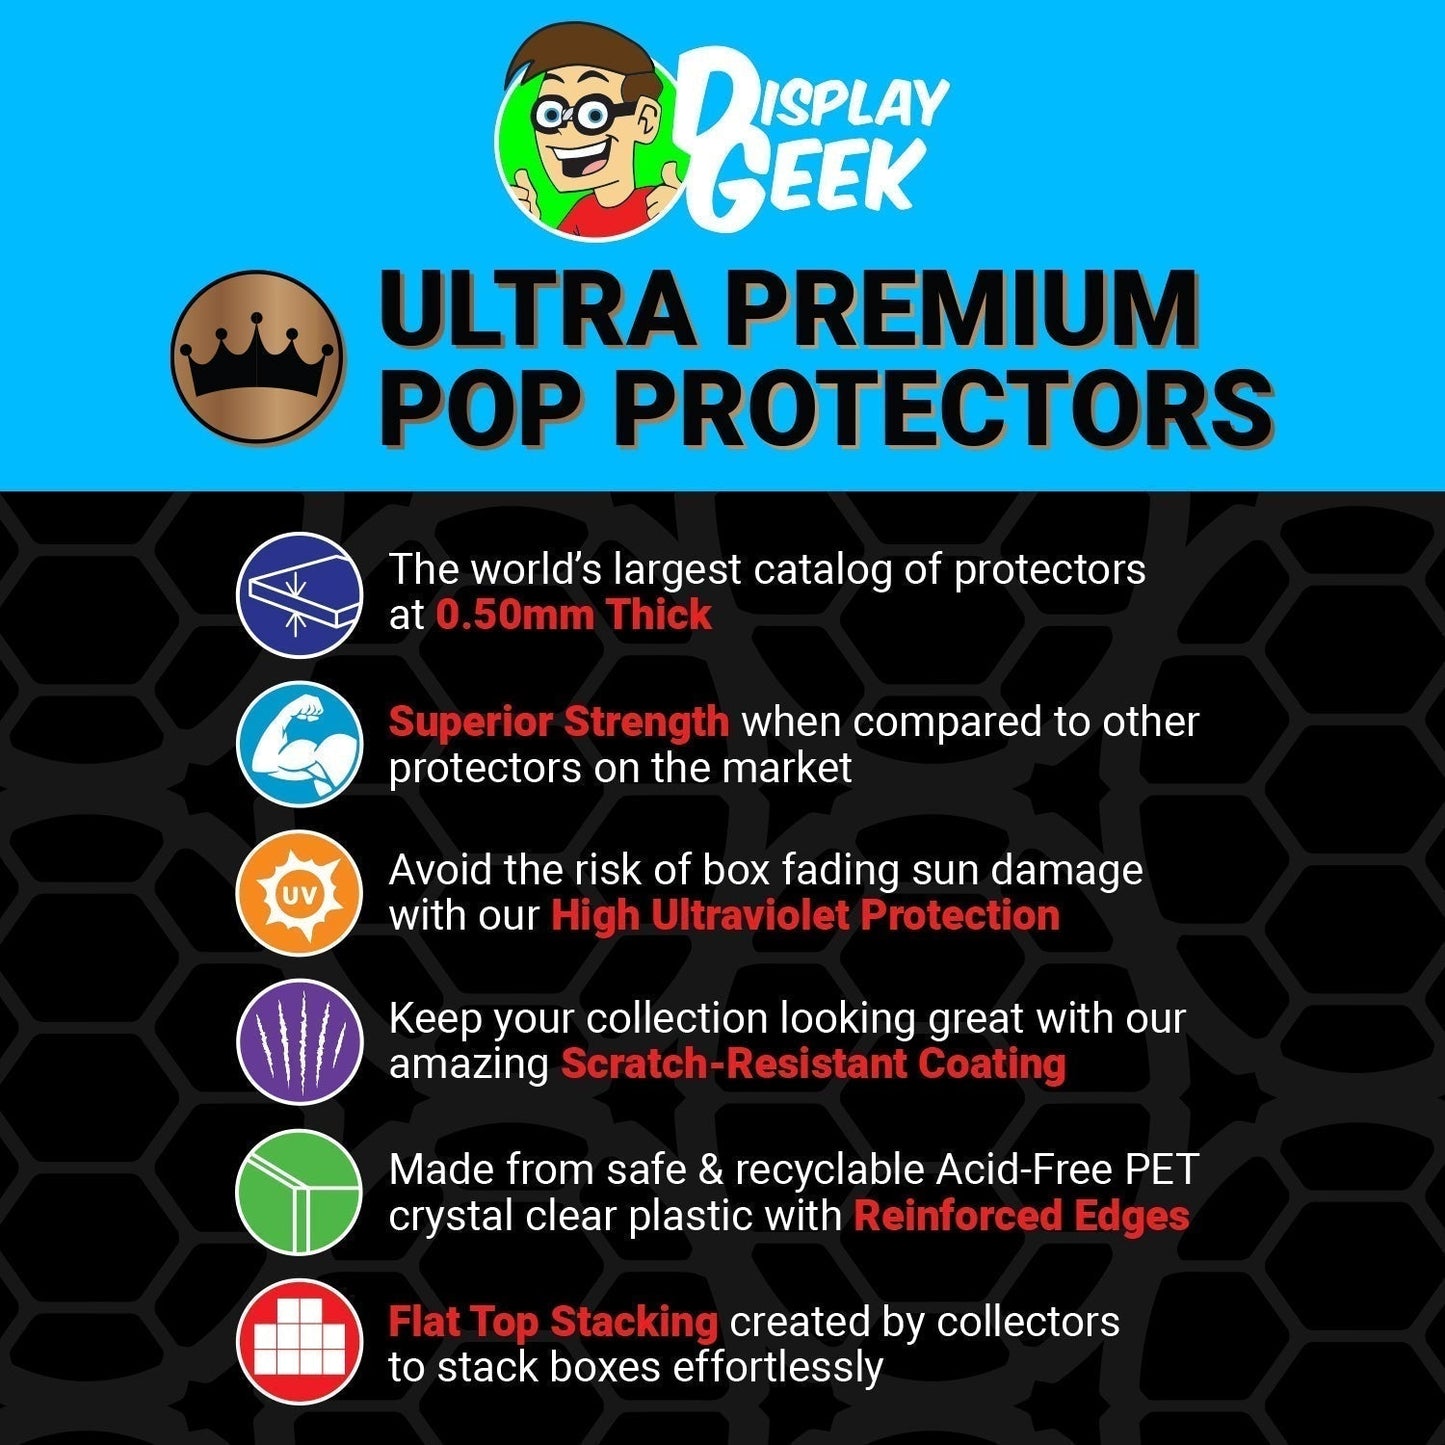 Pop Protector for Battle at Echo Base Princess Leia #376 Funko Pop Deluxe - PPG Pop Protector Guide Search Created by Display Geek